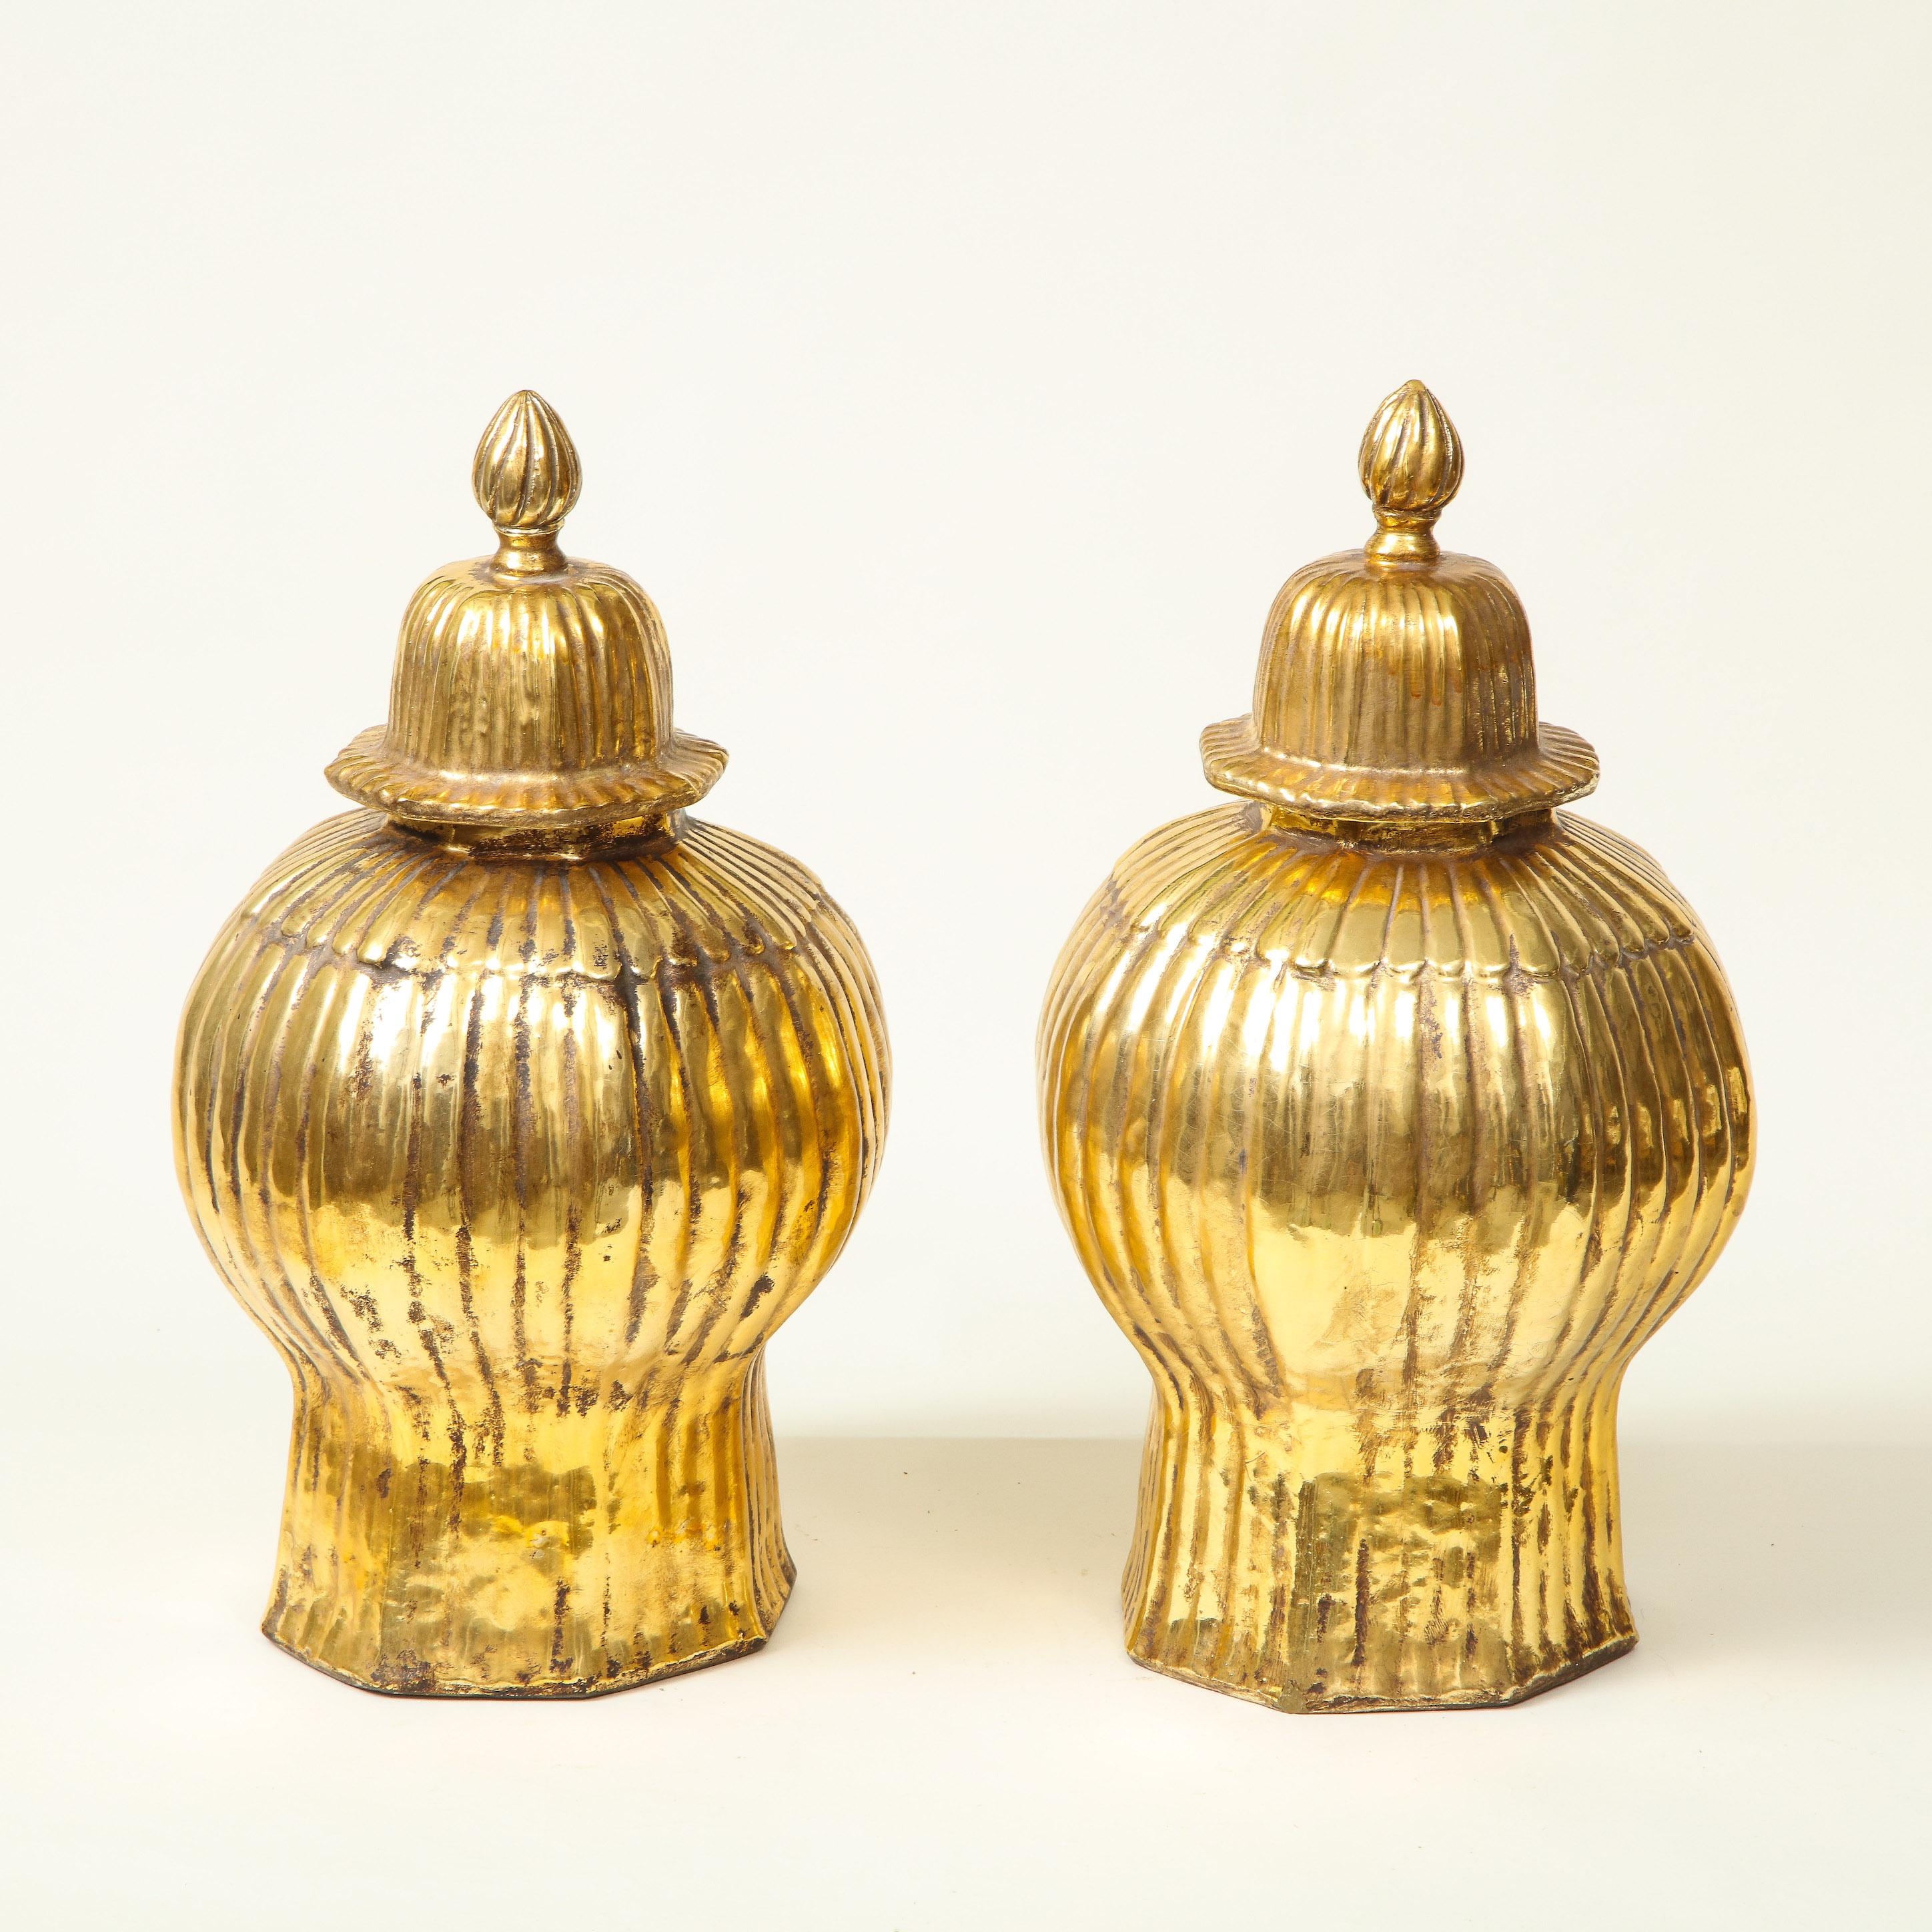 Chinese Export Pair of Gold Luster Ribbed Covered Ginger Jars